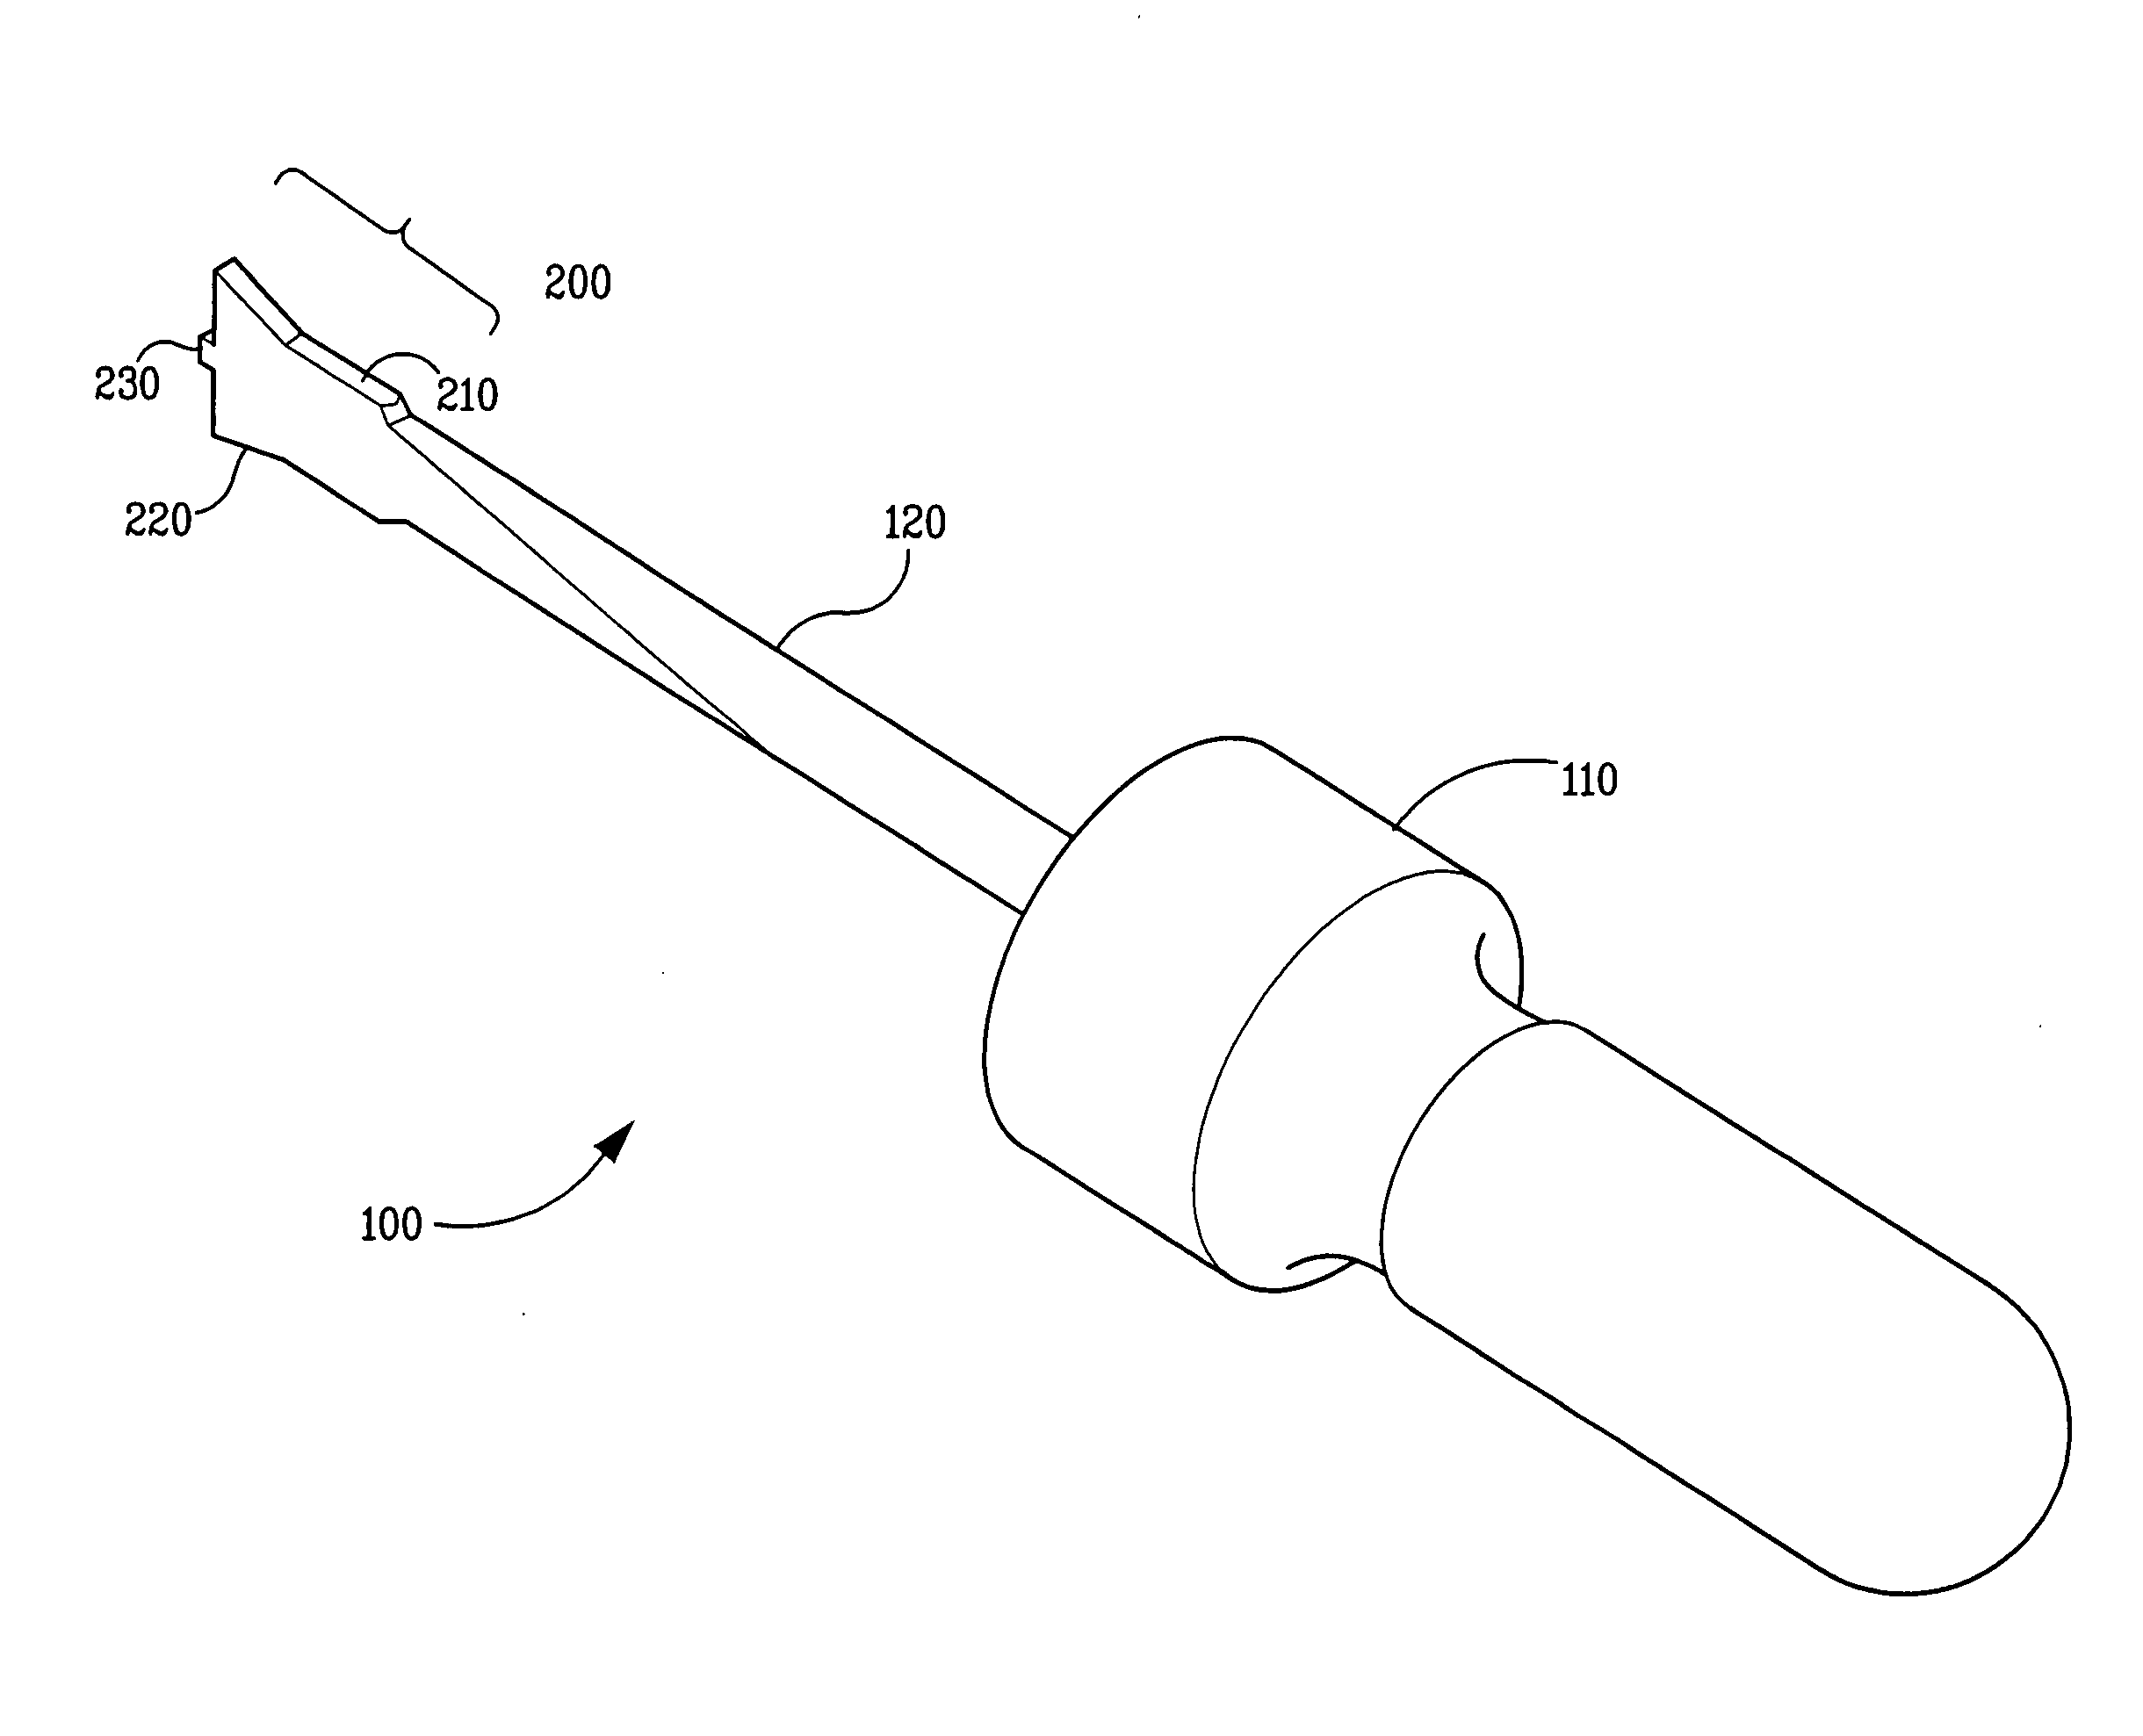 Tool element and screw for mating engagement therewith